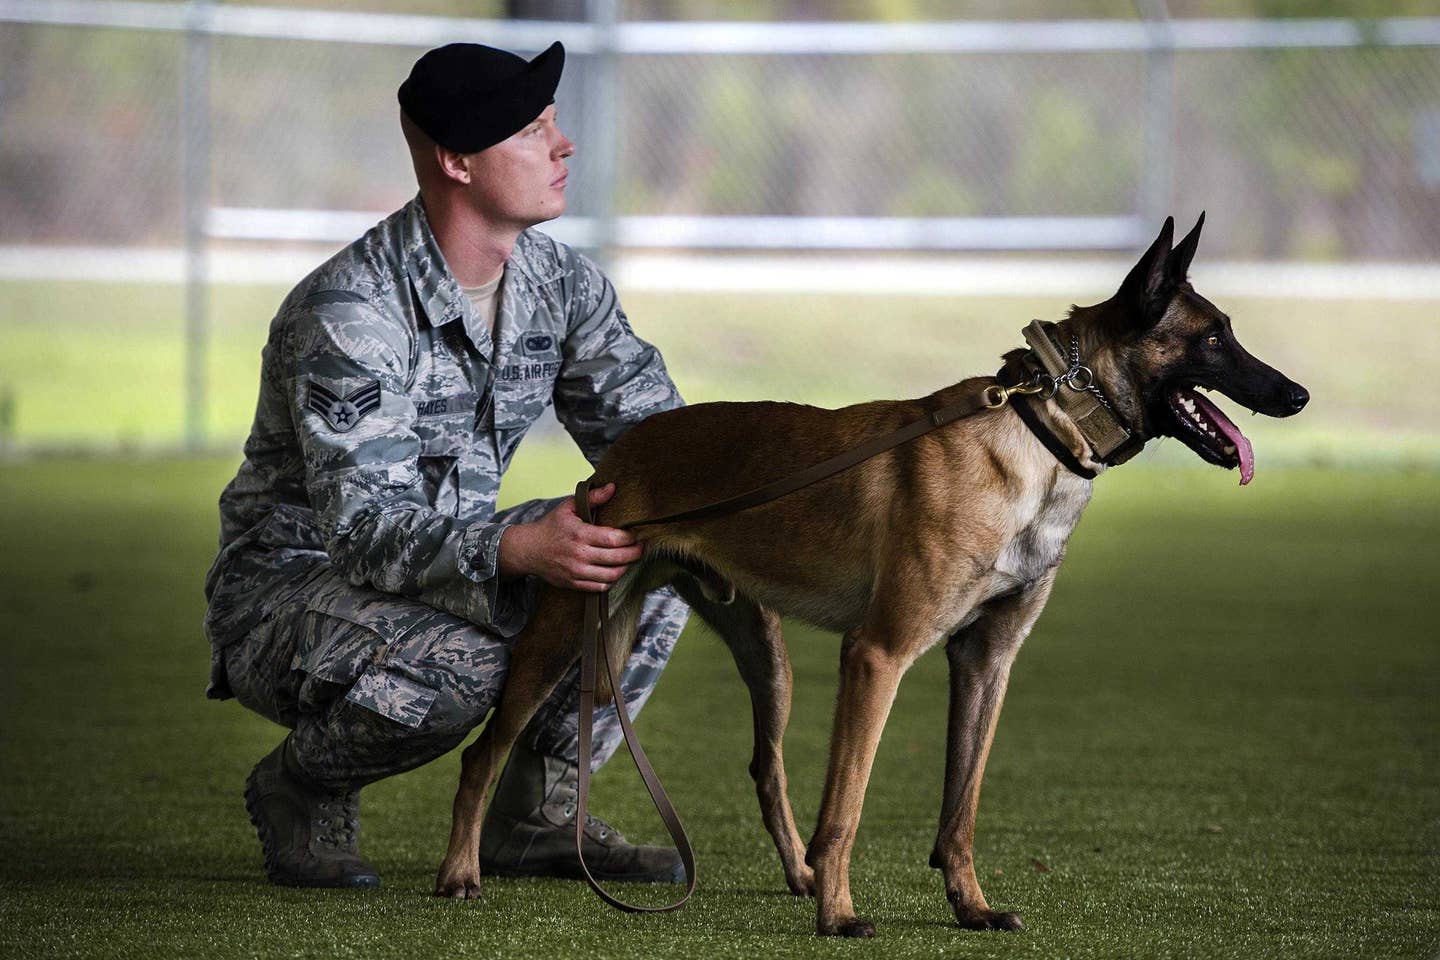 Air Force Senior Airman Anthony Hayes and Ttoby, a military working dog, take a break during a demonstration at Moody Air Force Base, Ga., Feb. 2, 2017. Hayes is a military dog handler assigned to the 23d Security Forces Squadron. Ttoby is a Belgian Malinois and specializes in personnel protection and detecting explosives, trained as a military dog at Joint Base San Antonio-Lackland, Texas. (Air Force photo by Tech. Sgt. Zachary Wolf)